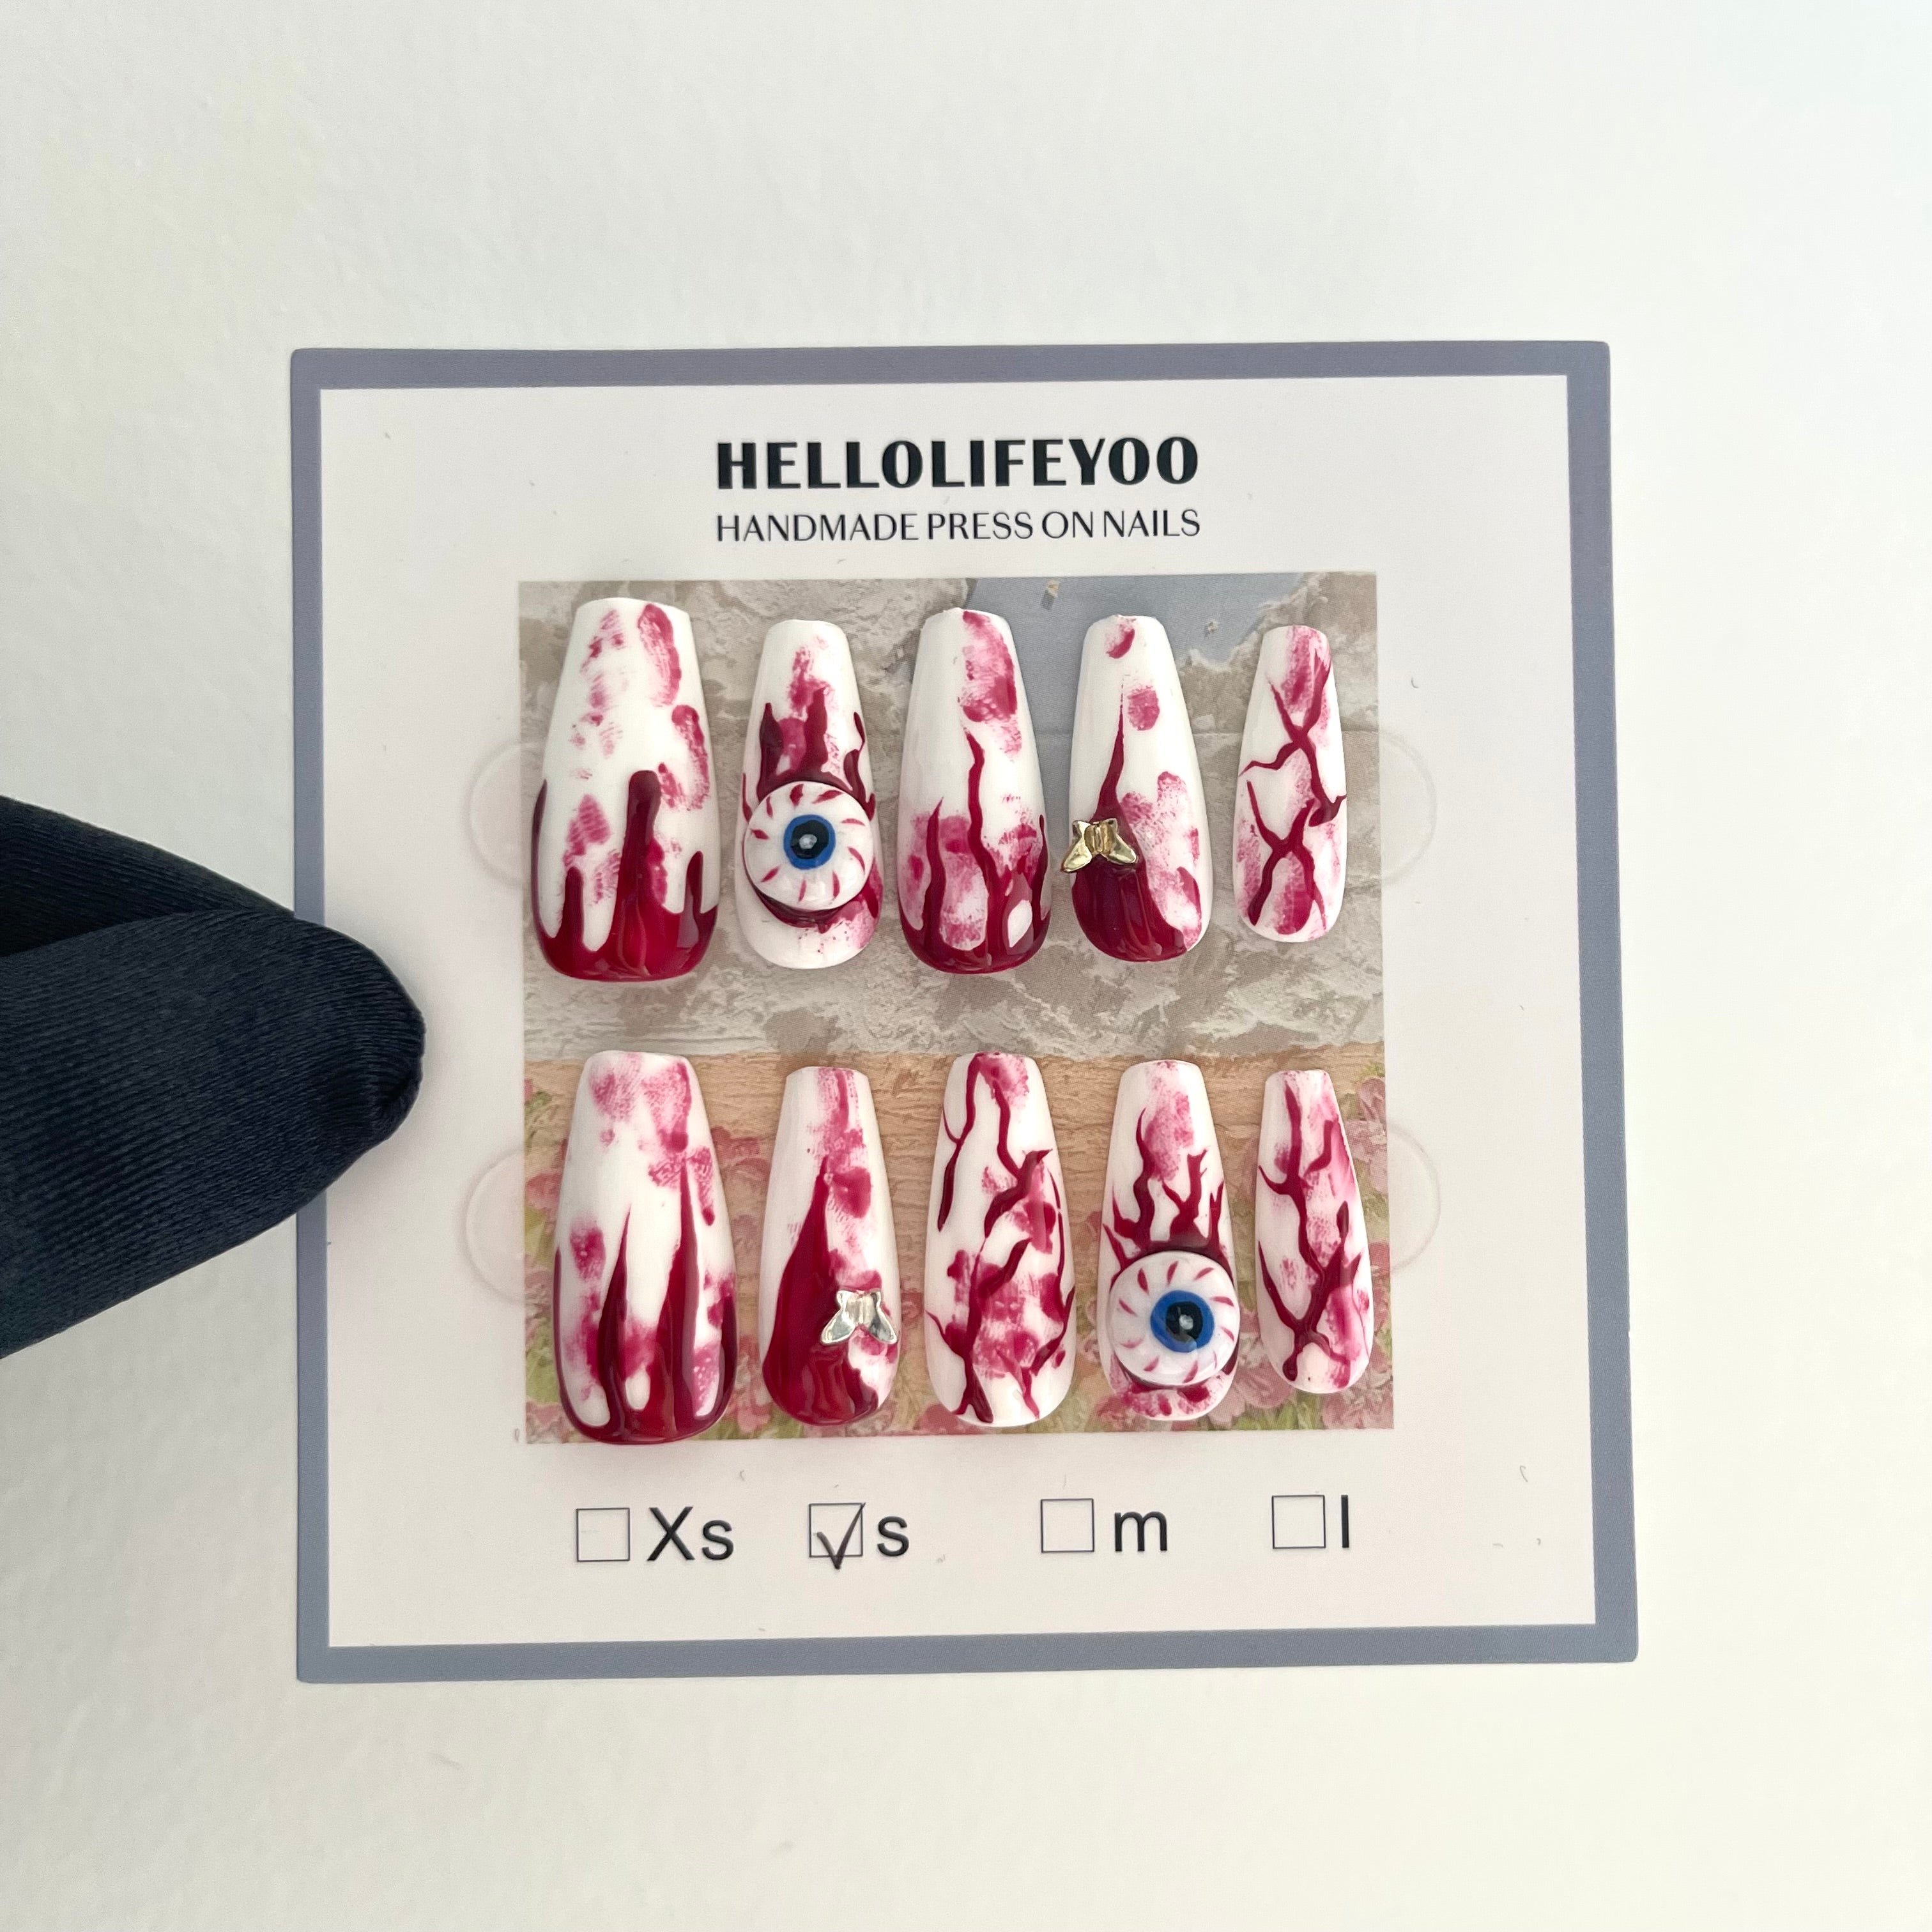 【HALLOWEEN】DEVIL'S EYE-TEN PIECES OF HANDCRAFTED PRESS ON NAIL